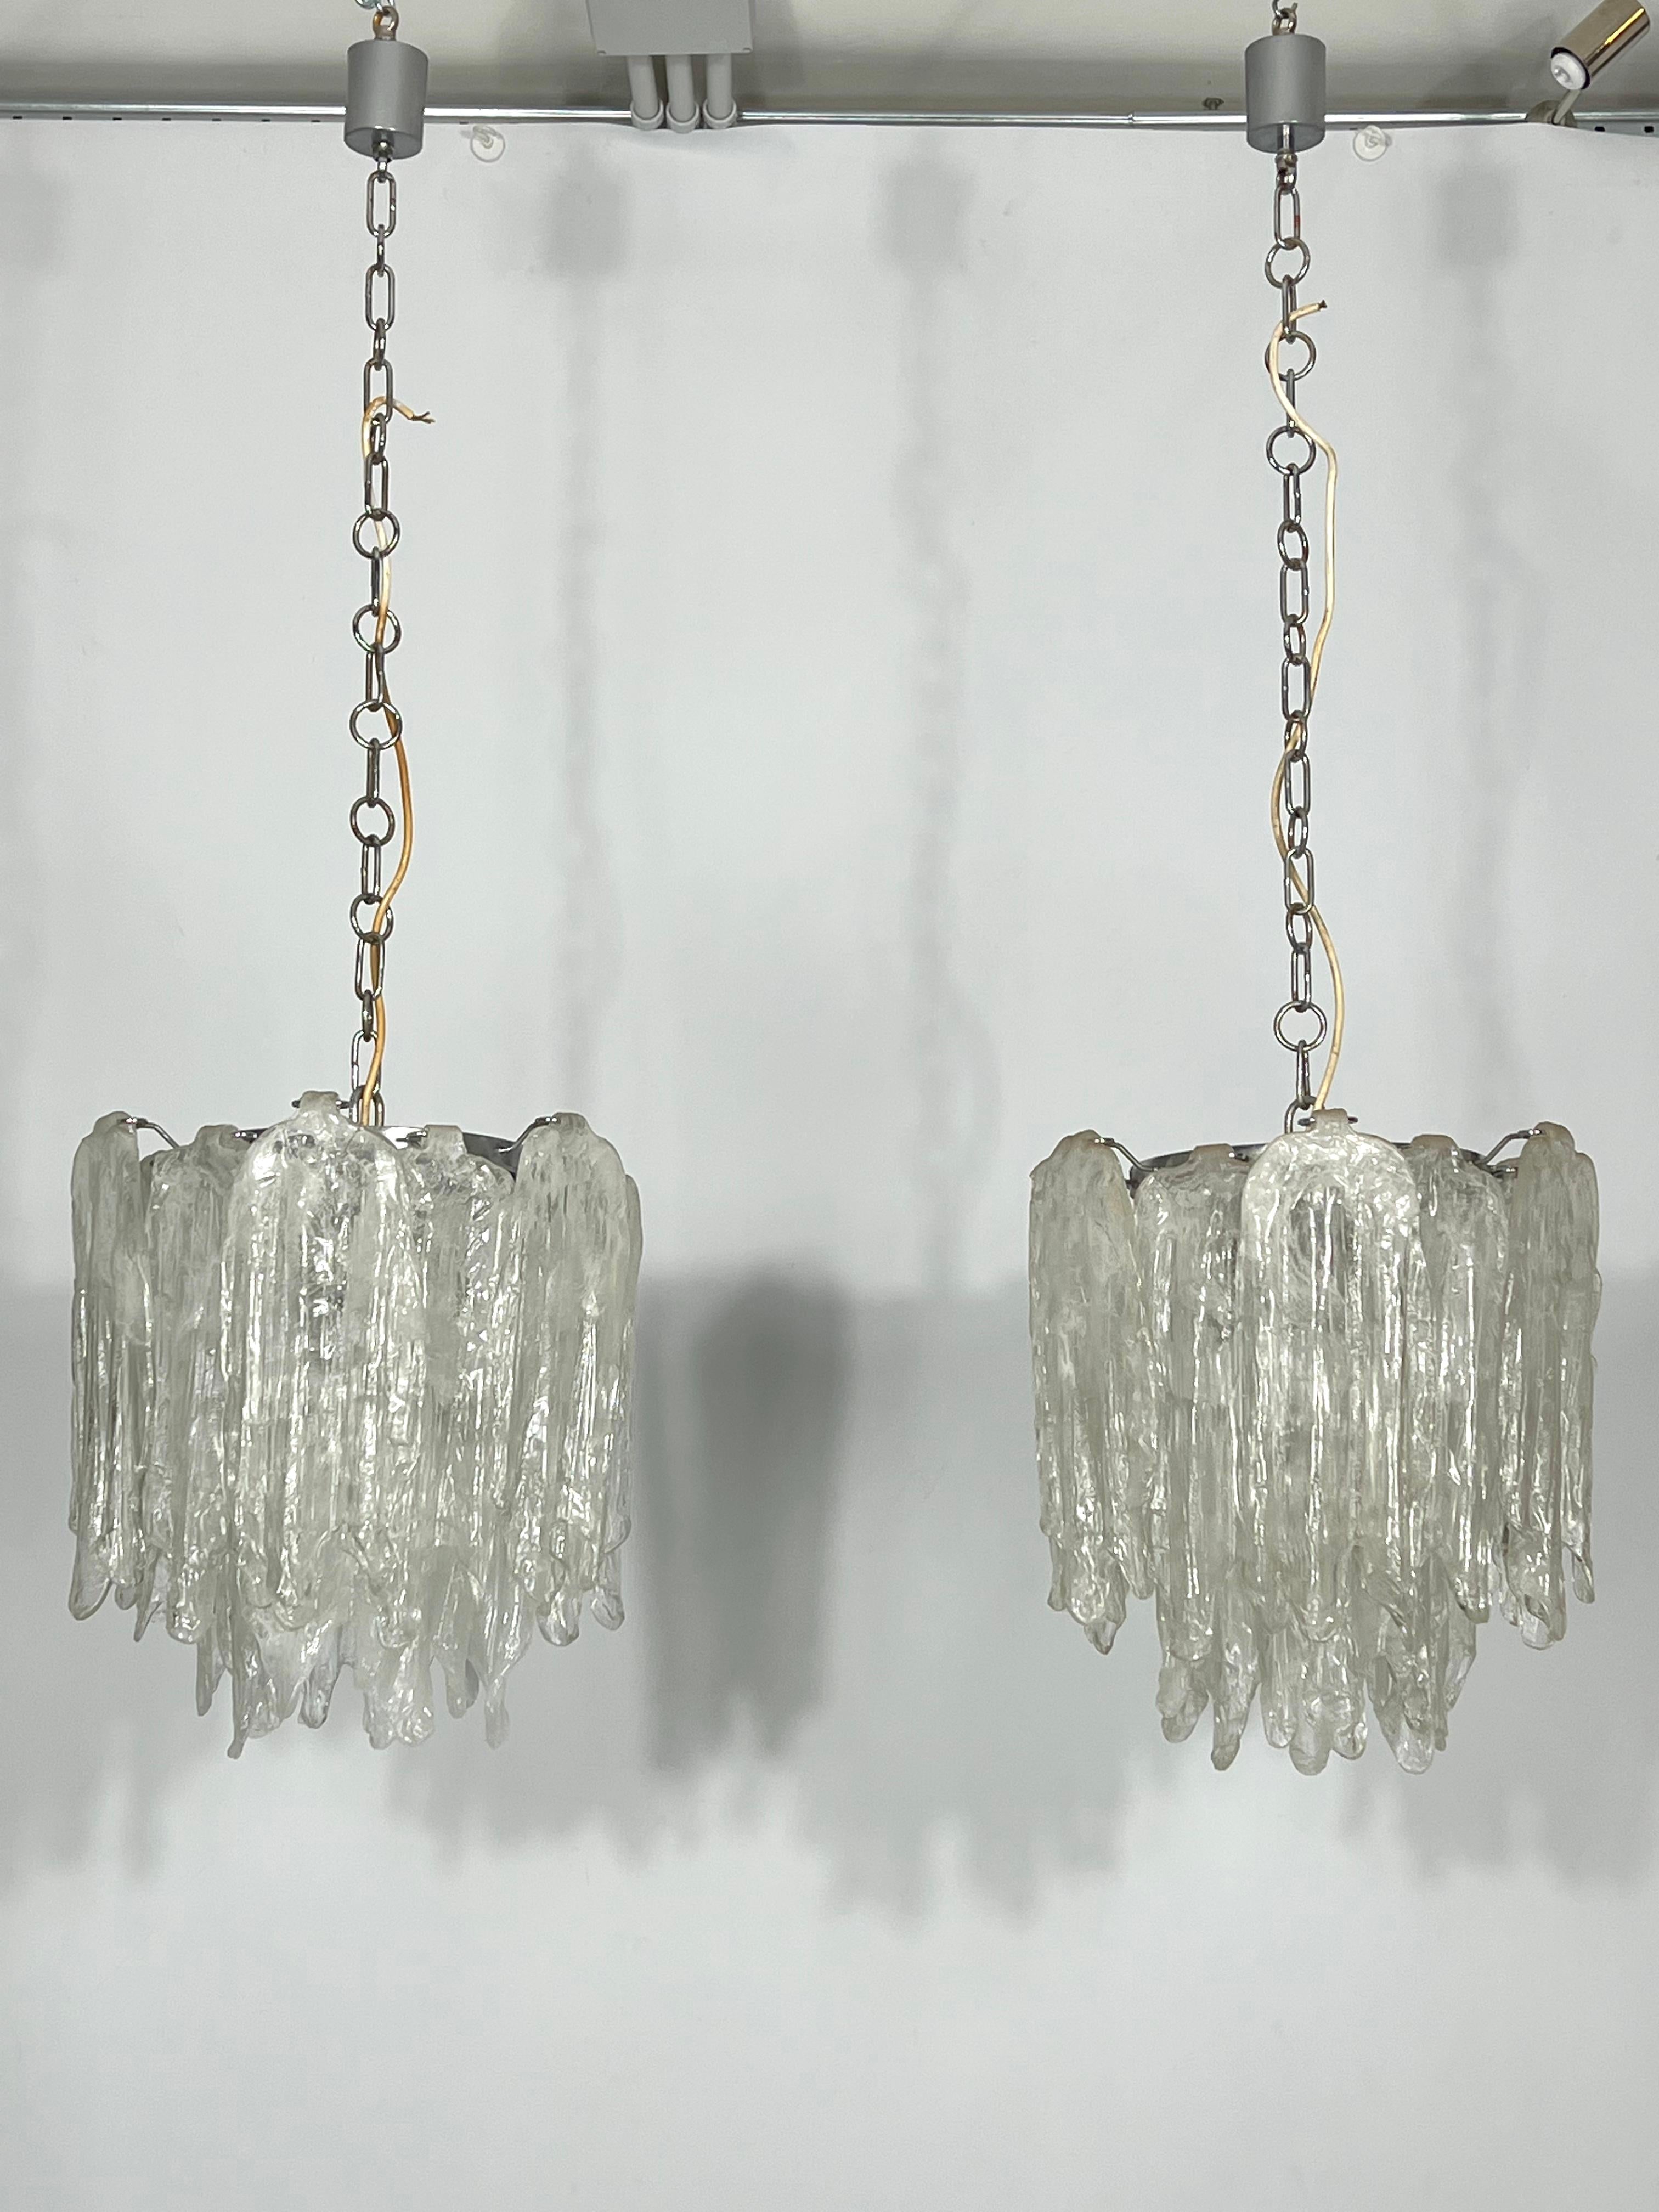 Great vintage condition for this pair of Mazzega chandeliers made from Murano glass type Ice and produced in Italy during the 70s. Each chandelier mounts 18 glasses. No missing parts, chips or cracks. Trace of age and use on the metal structure.